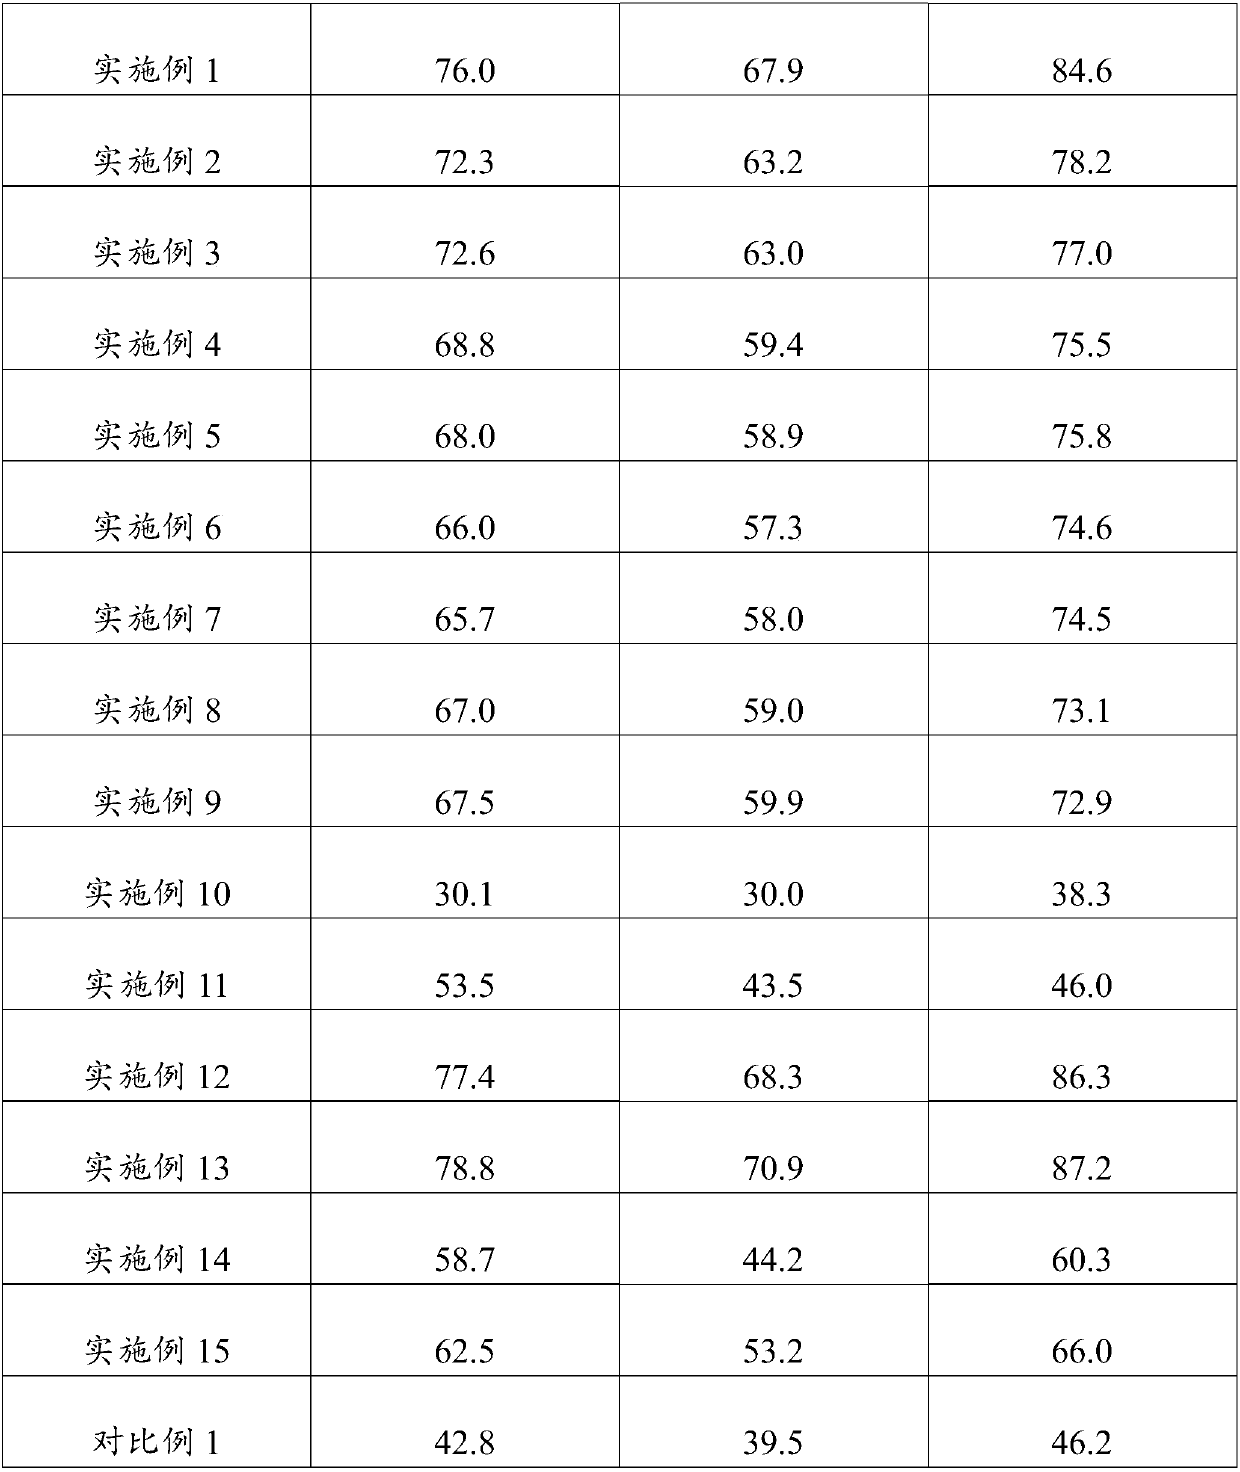 Anti-aging composition and skin-care product containing anti-aging composition